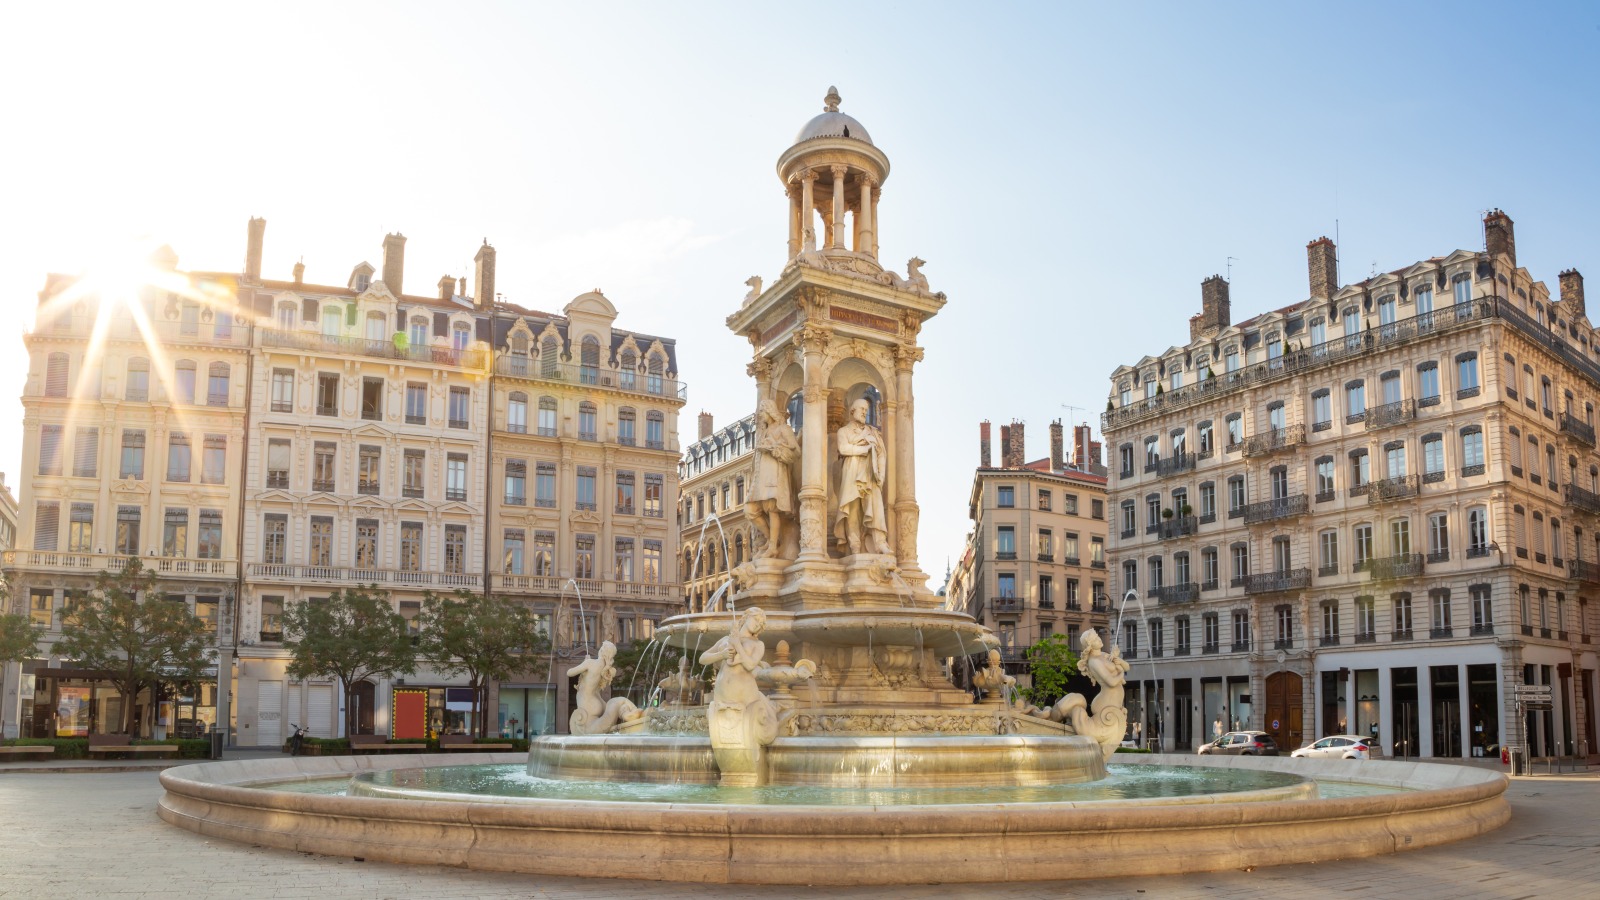 The famous fountain at 'Place de Jacobins' in the French city of Lyon.